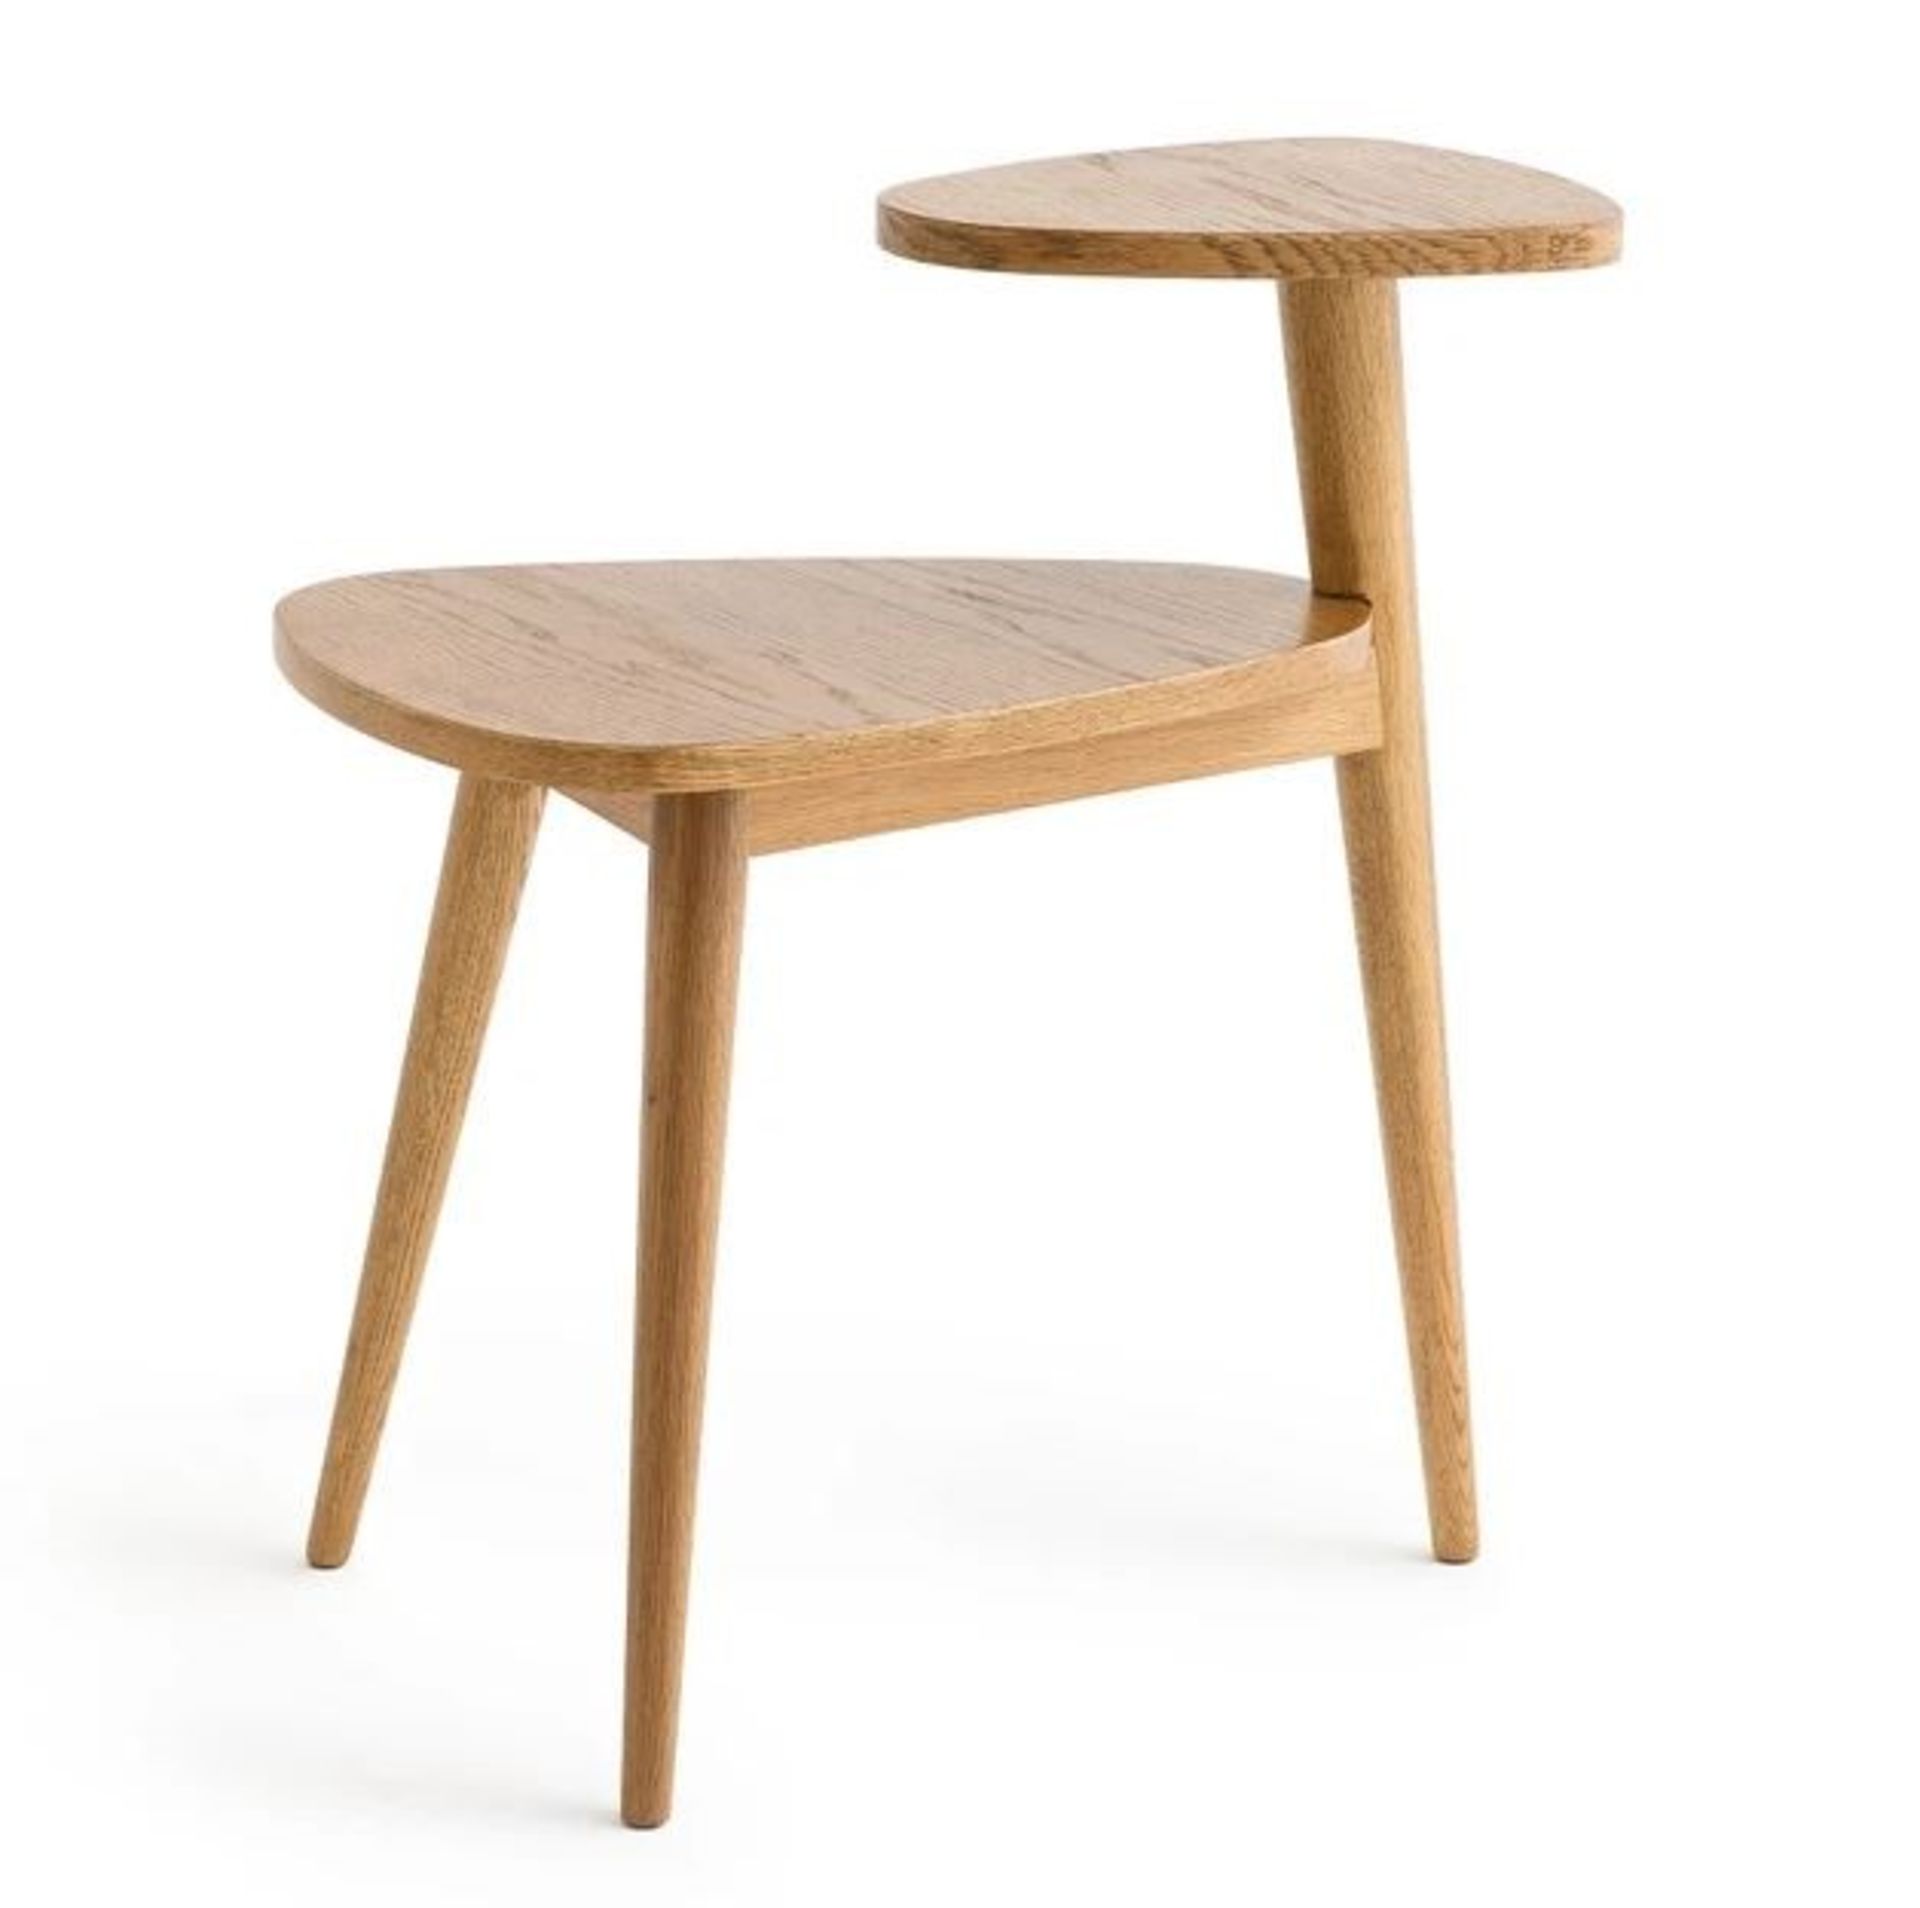 LA REDOUTE QUILDA VINTAGE-STYLE SIDE TABLE WITH TWO-TIERS